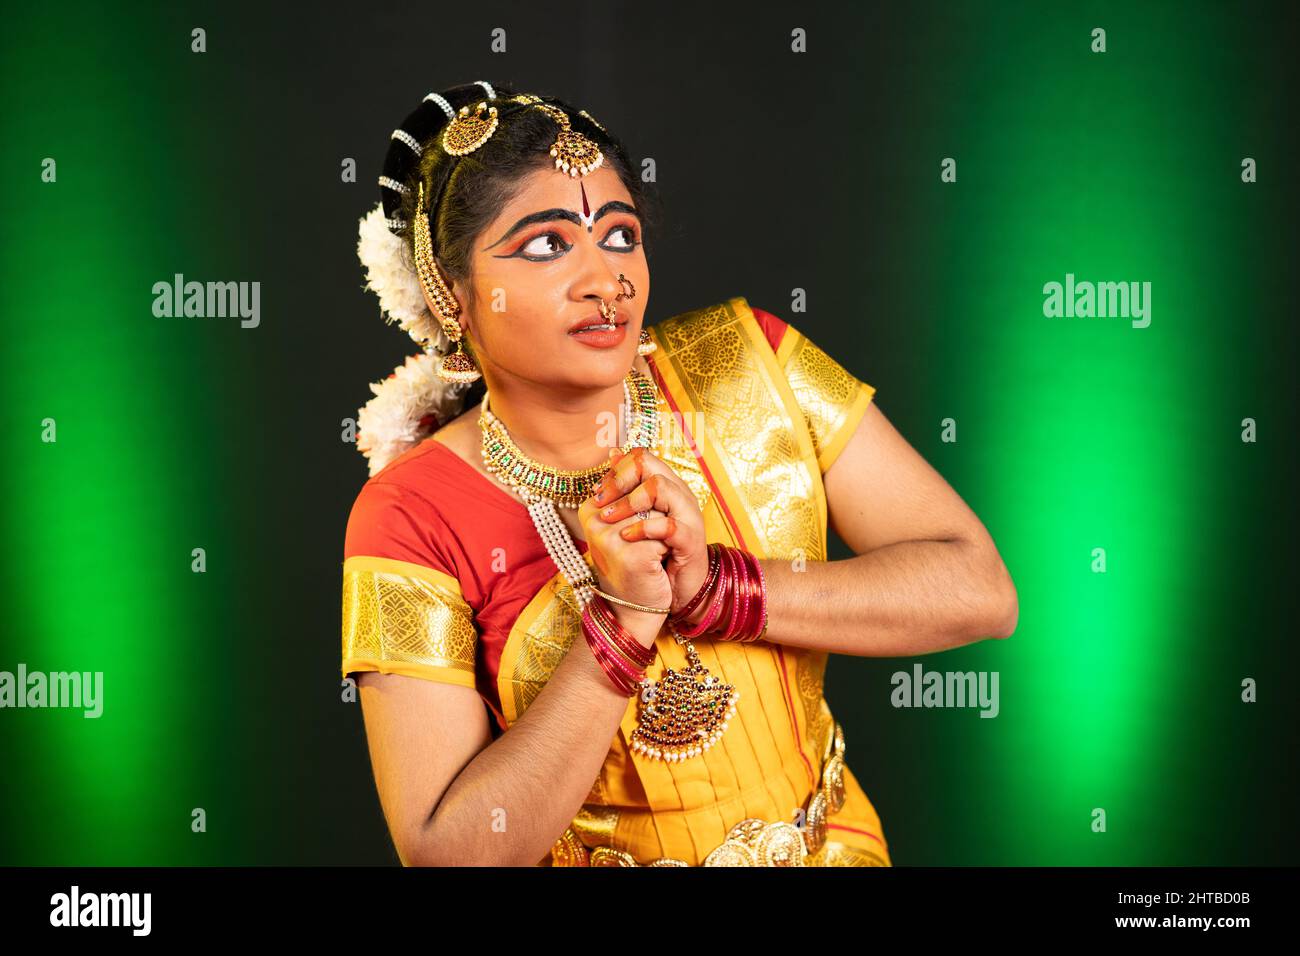 Young bharatnatyam dancer performing fearful or sorrow expression or emotion on stage - concept of indian culture, traditional and classical dance Stock Photo